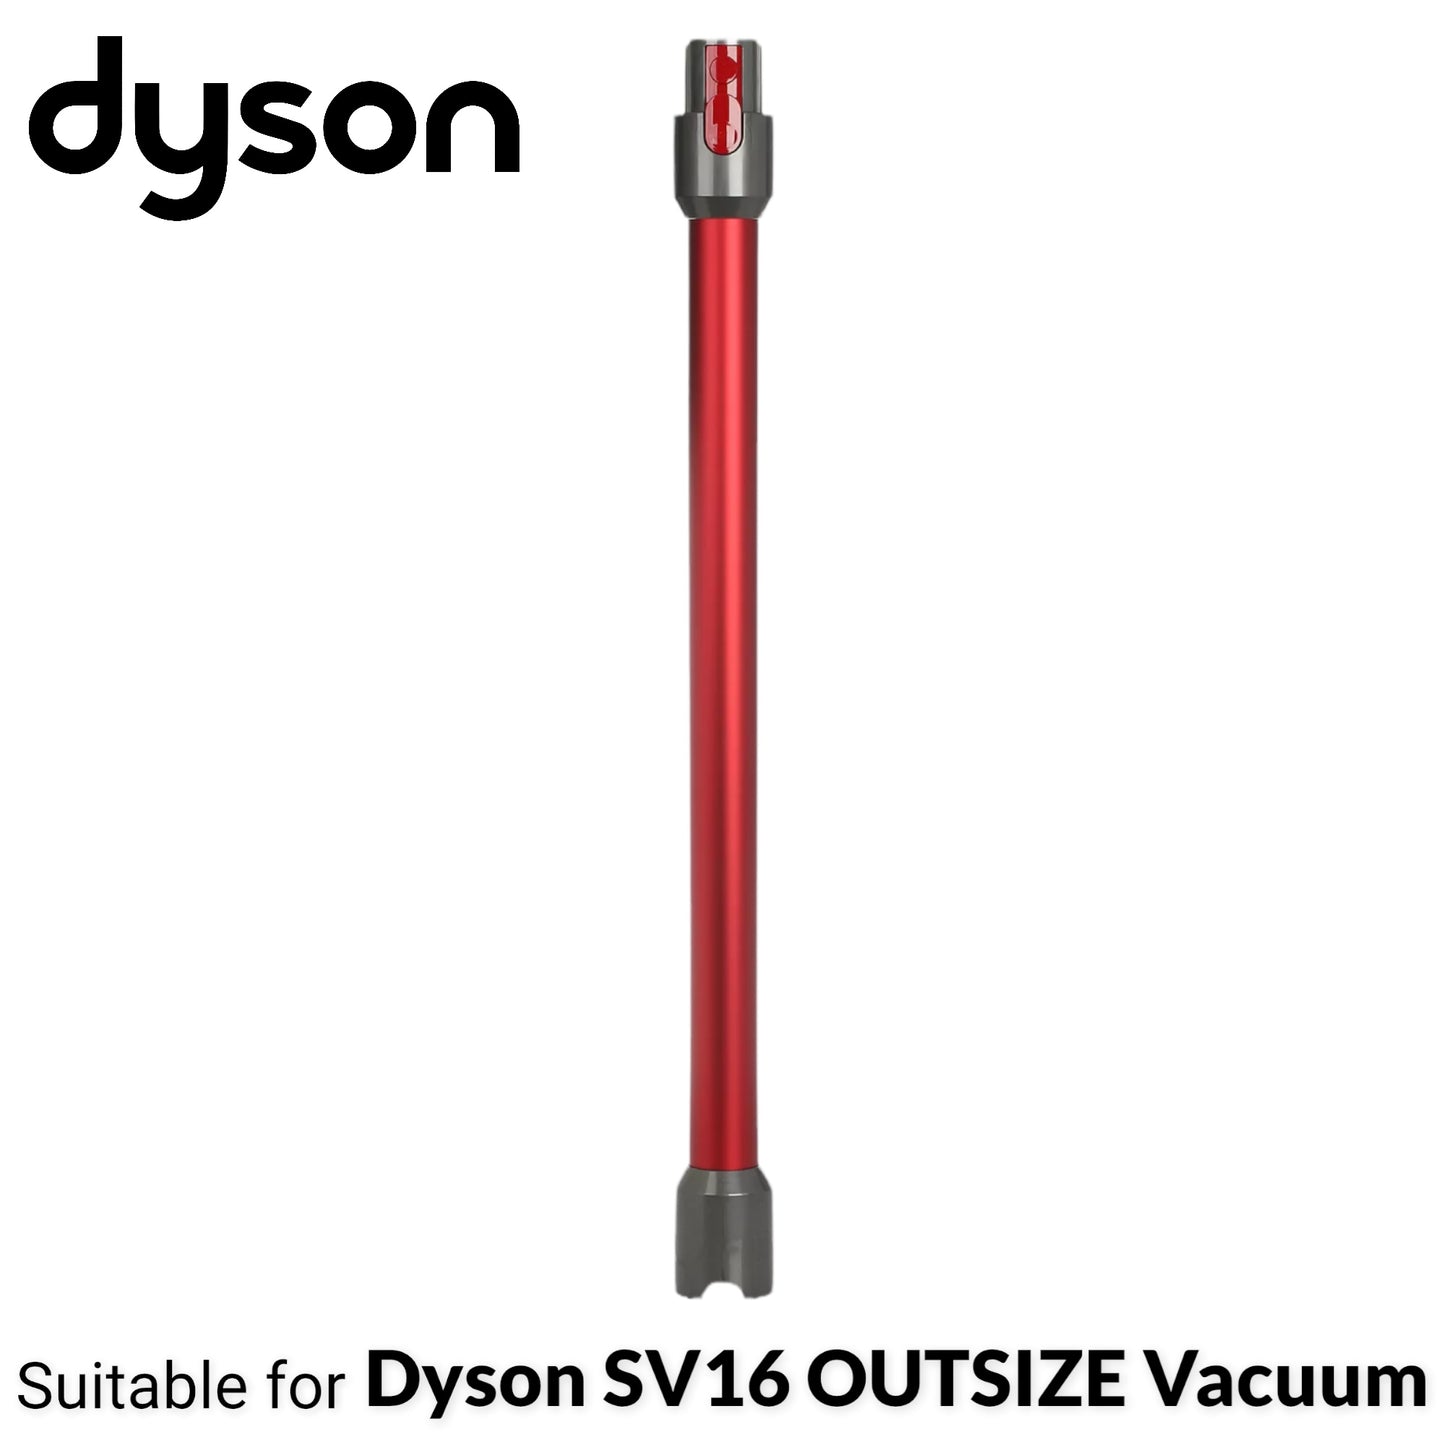 New Genuine Dyson OUTSIZE V11 SV16 Vacuum Quick Release Wand Tube Assembly - Red